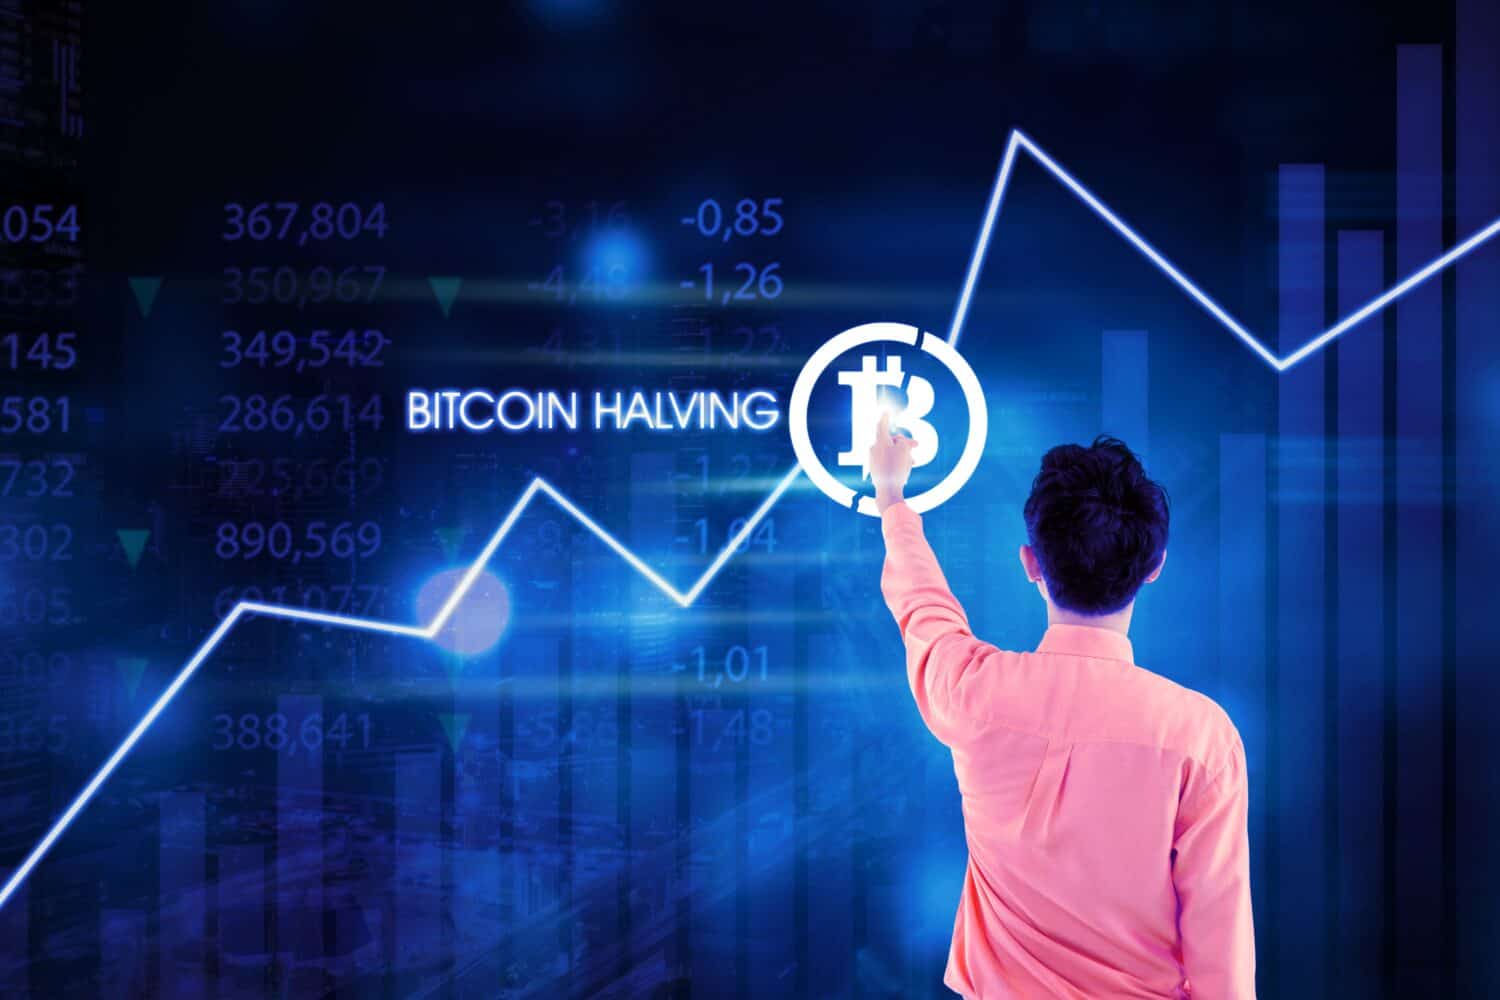 Man pressing bitcoin icon. Price of bitcoin is increasing in the cryptocurrency market after bitcoin halving event